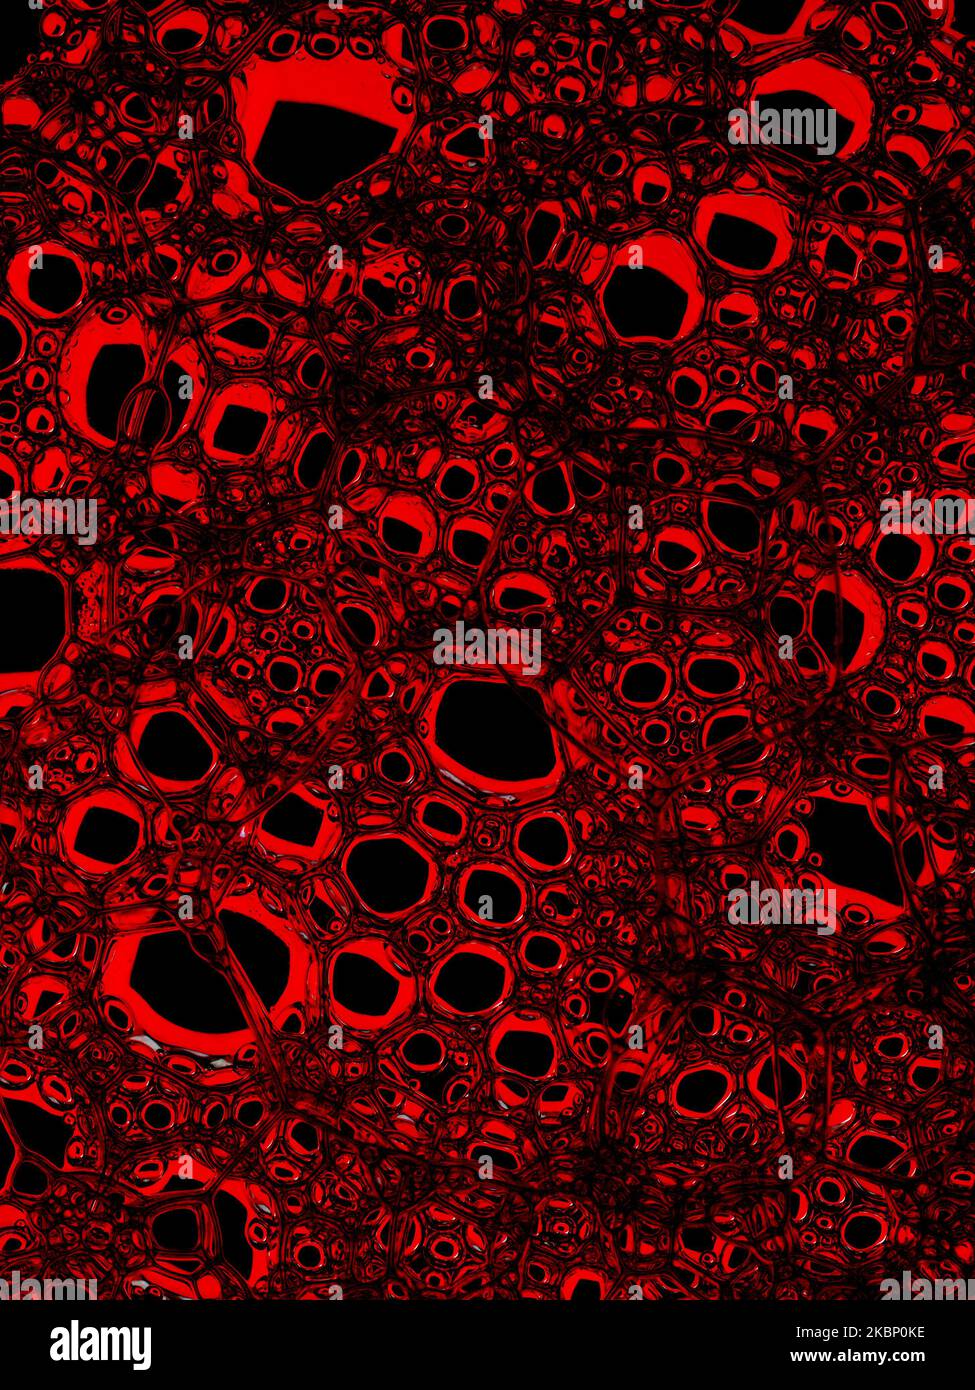 Red, black graphic abstract background. Stock Photo